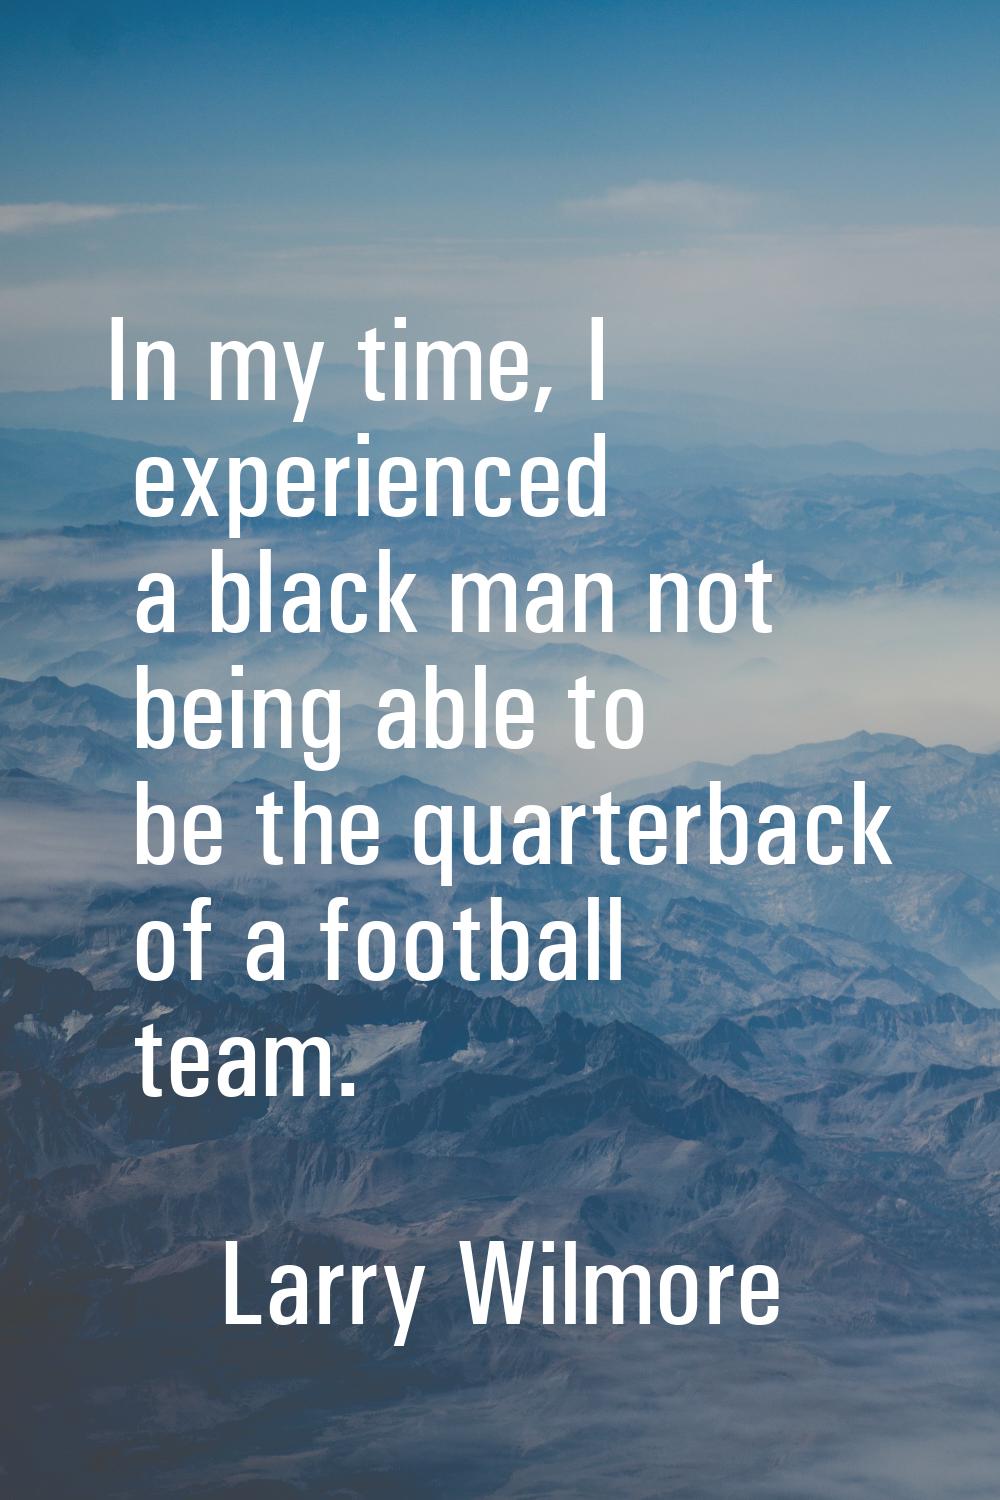 In my time, I experienced a black man not being able to be the quarterback of a football team.